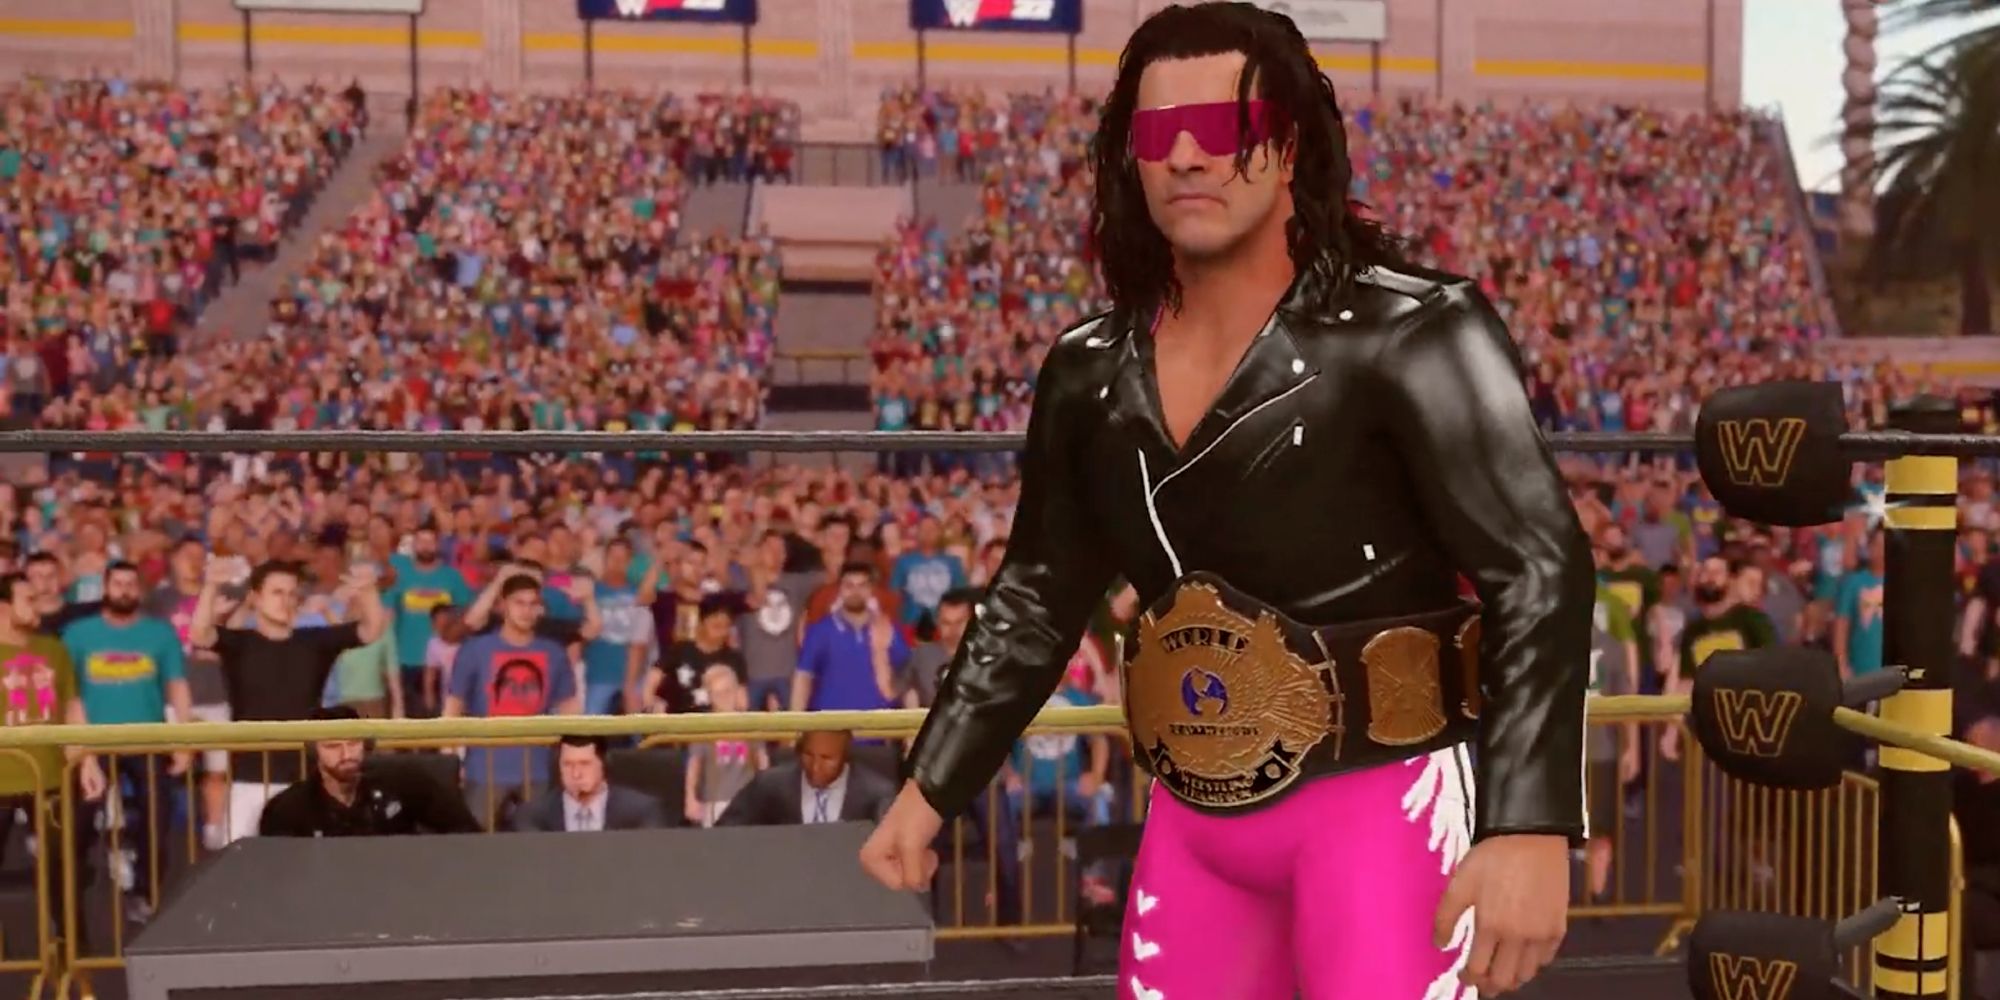 Iconic Fighting Stances in Video Games - Bret "The Hitman" Hart - Player makes a grand entrance